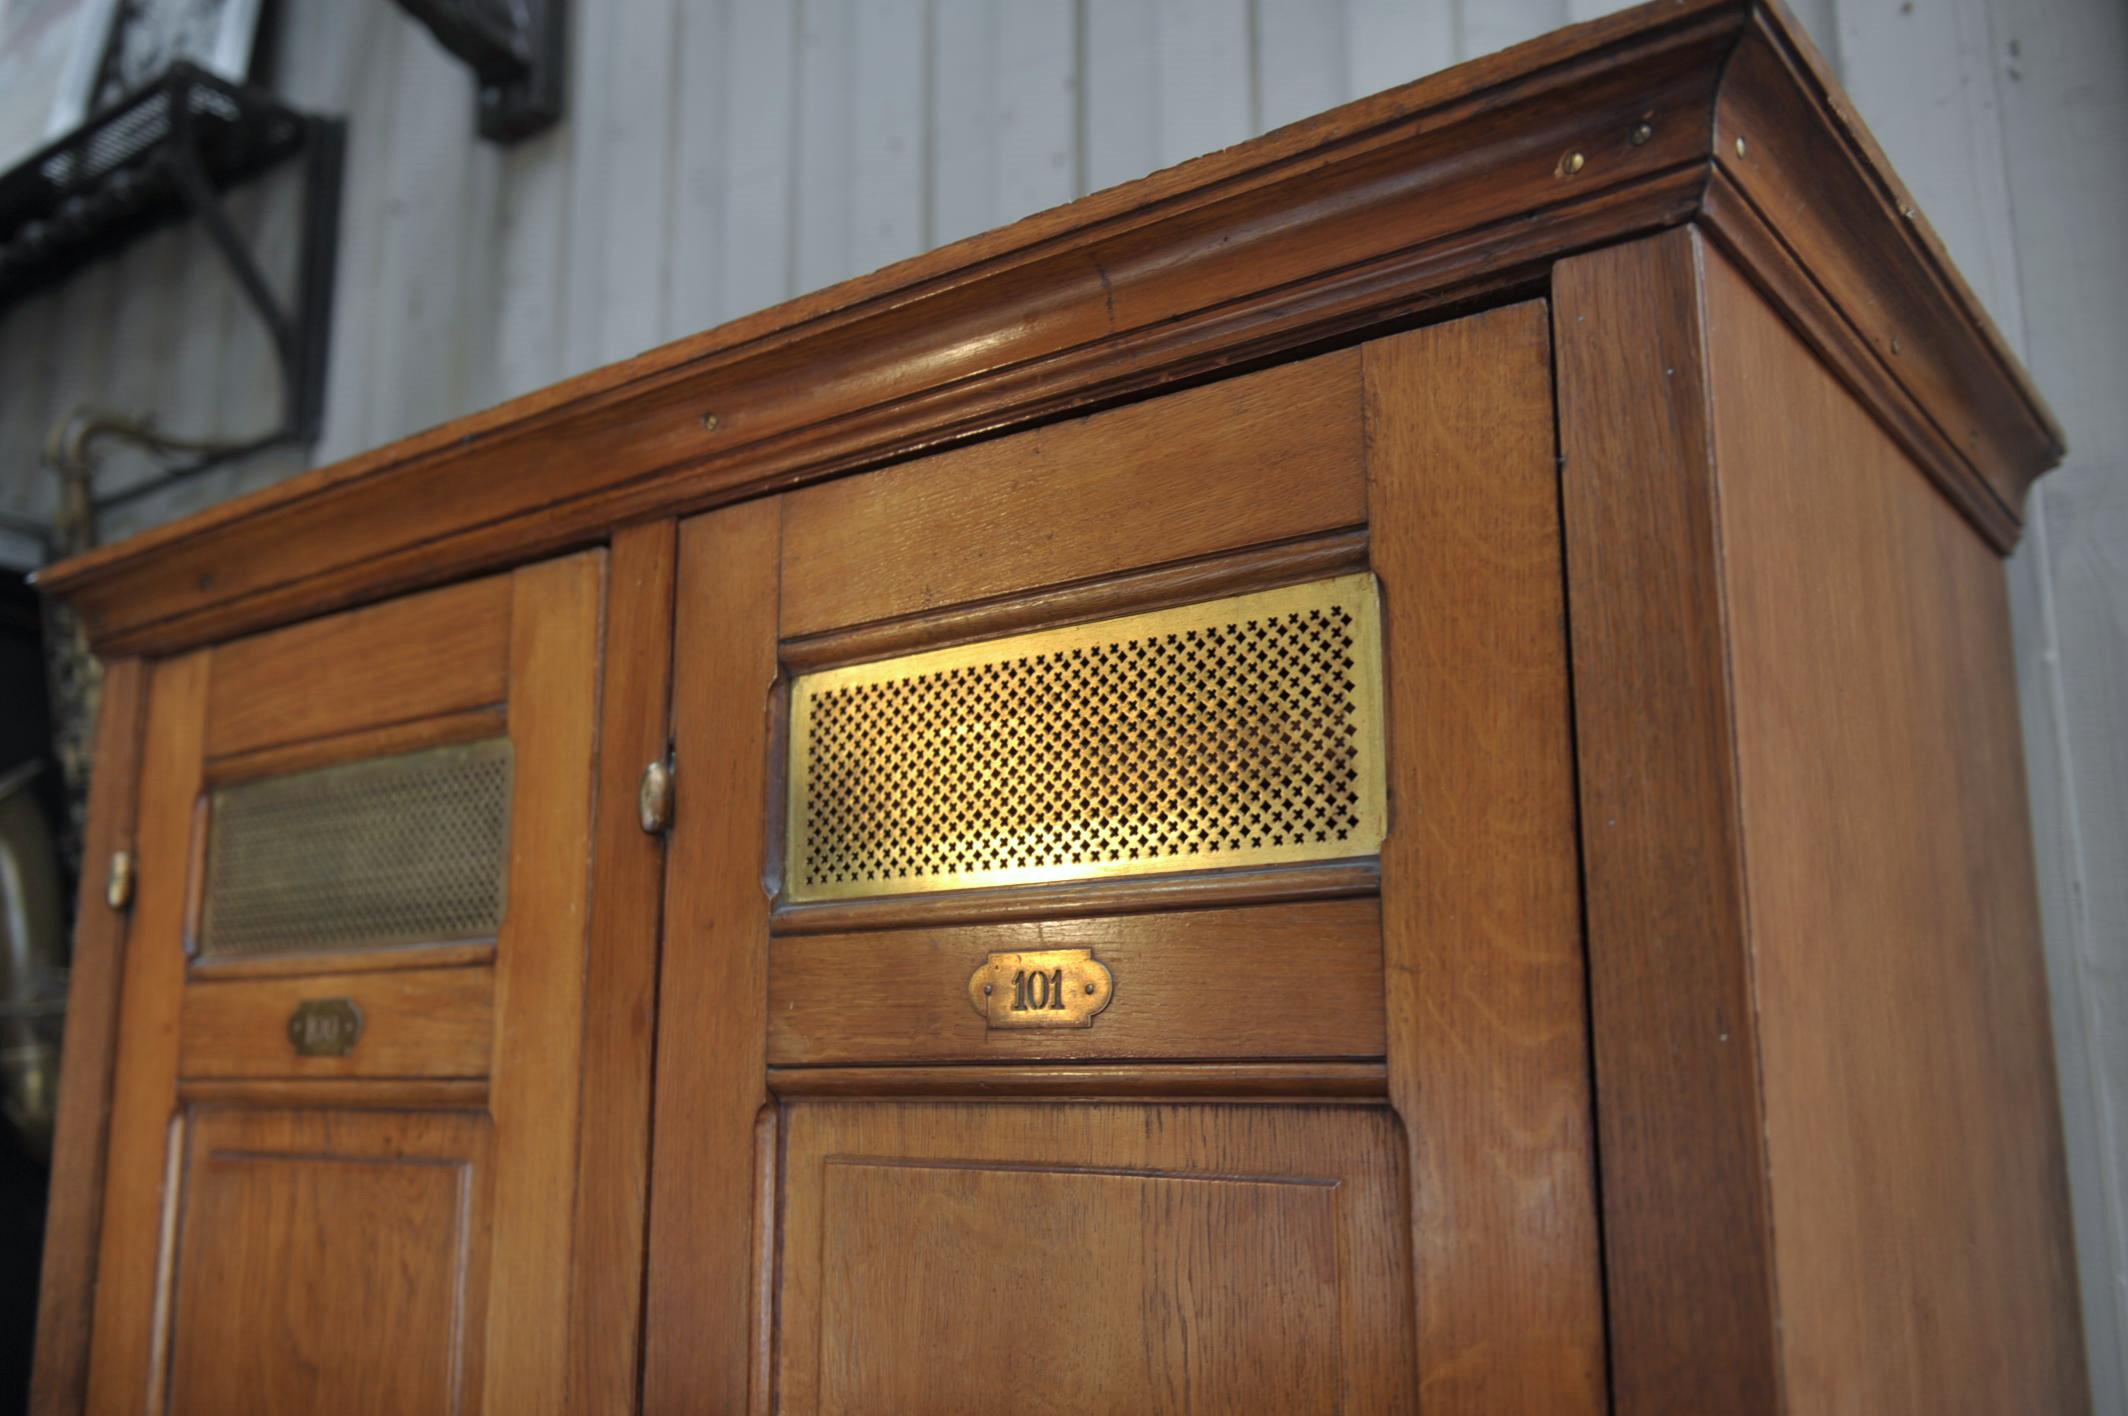 Early 20th Century Solid Oak and Brass Banque De France Cupboard Cabinet, circa 1900